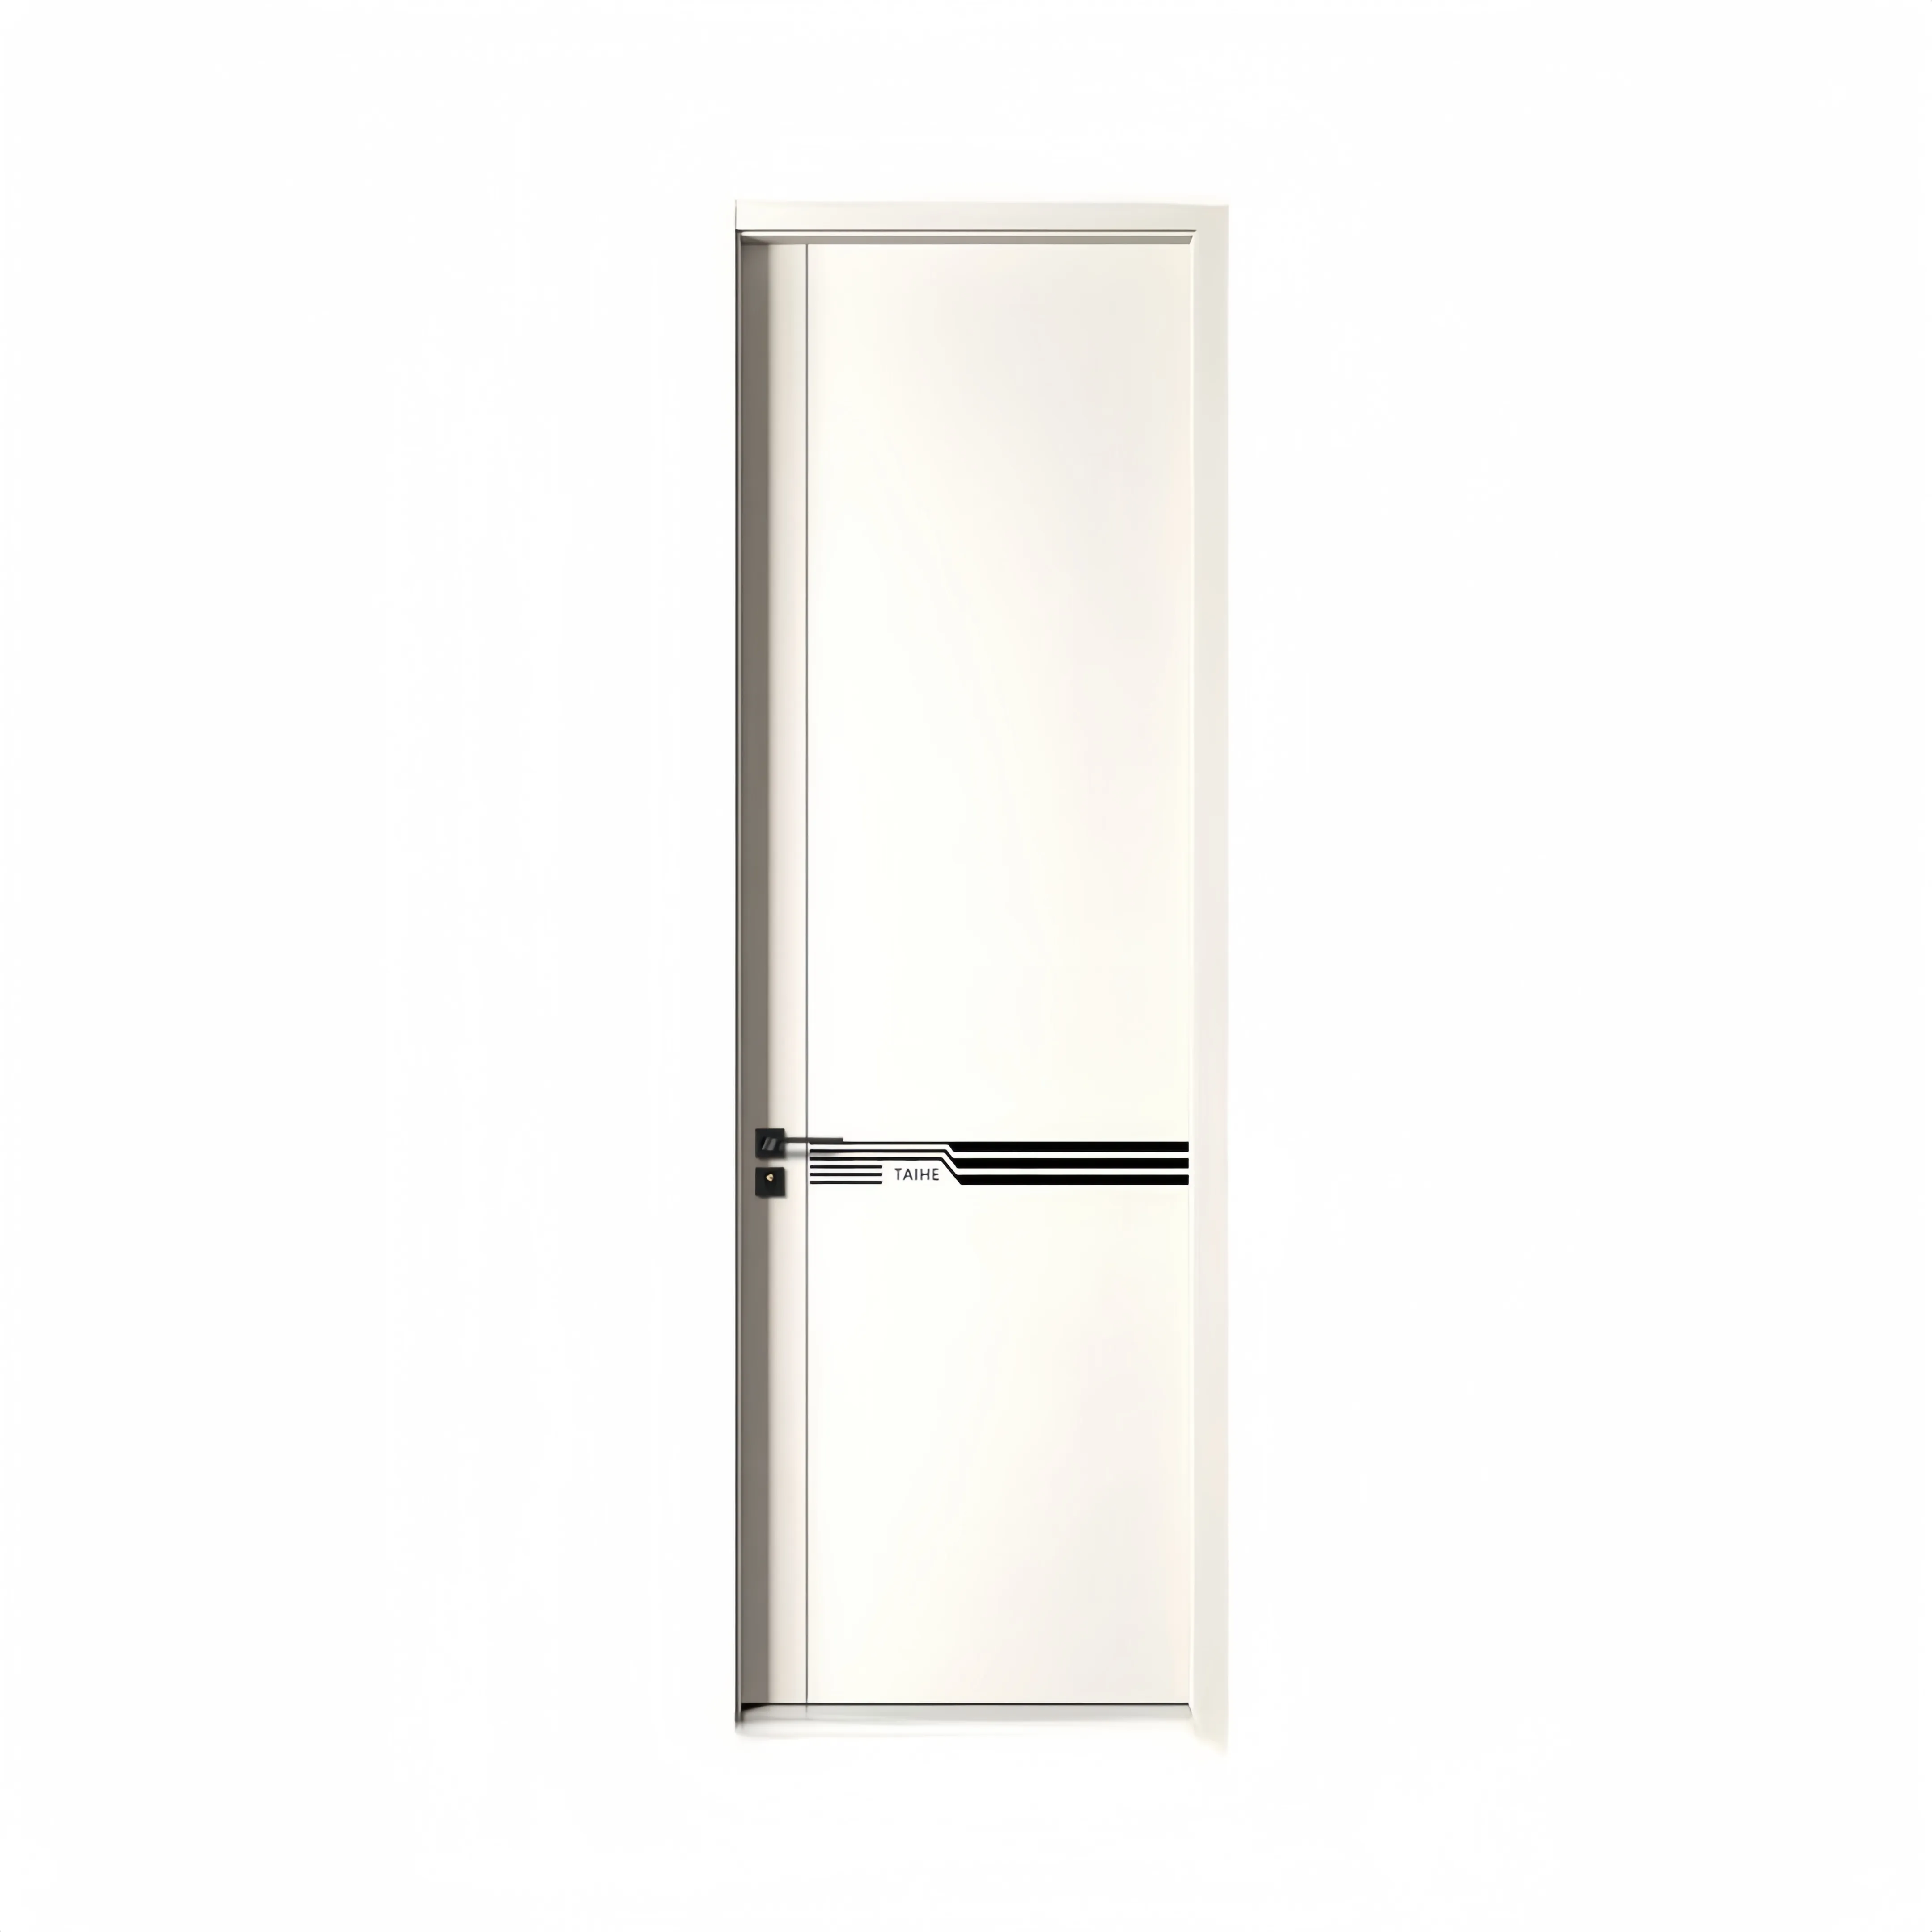 Discount and high quality luxury panel decorated solid wood figure for frame lacquered white door